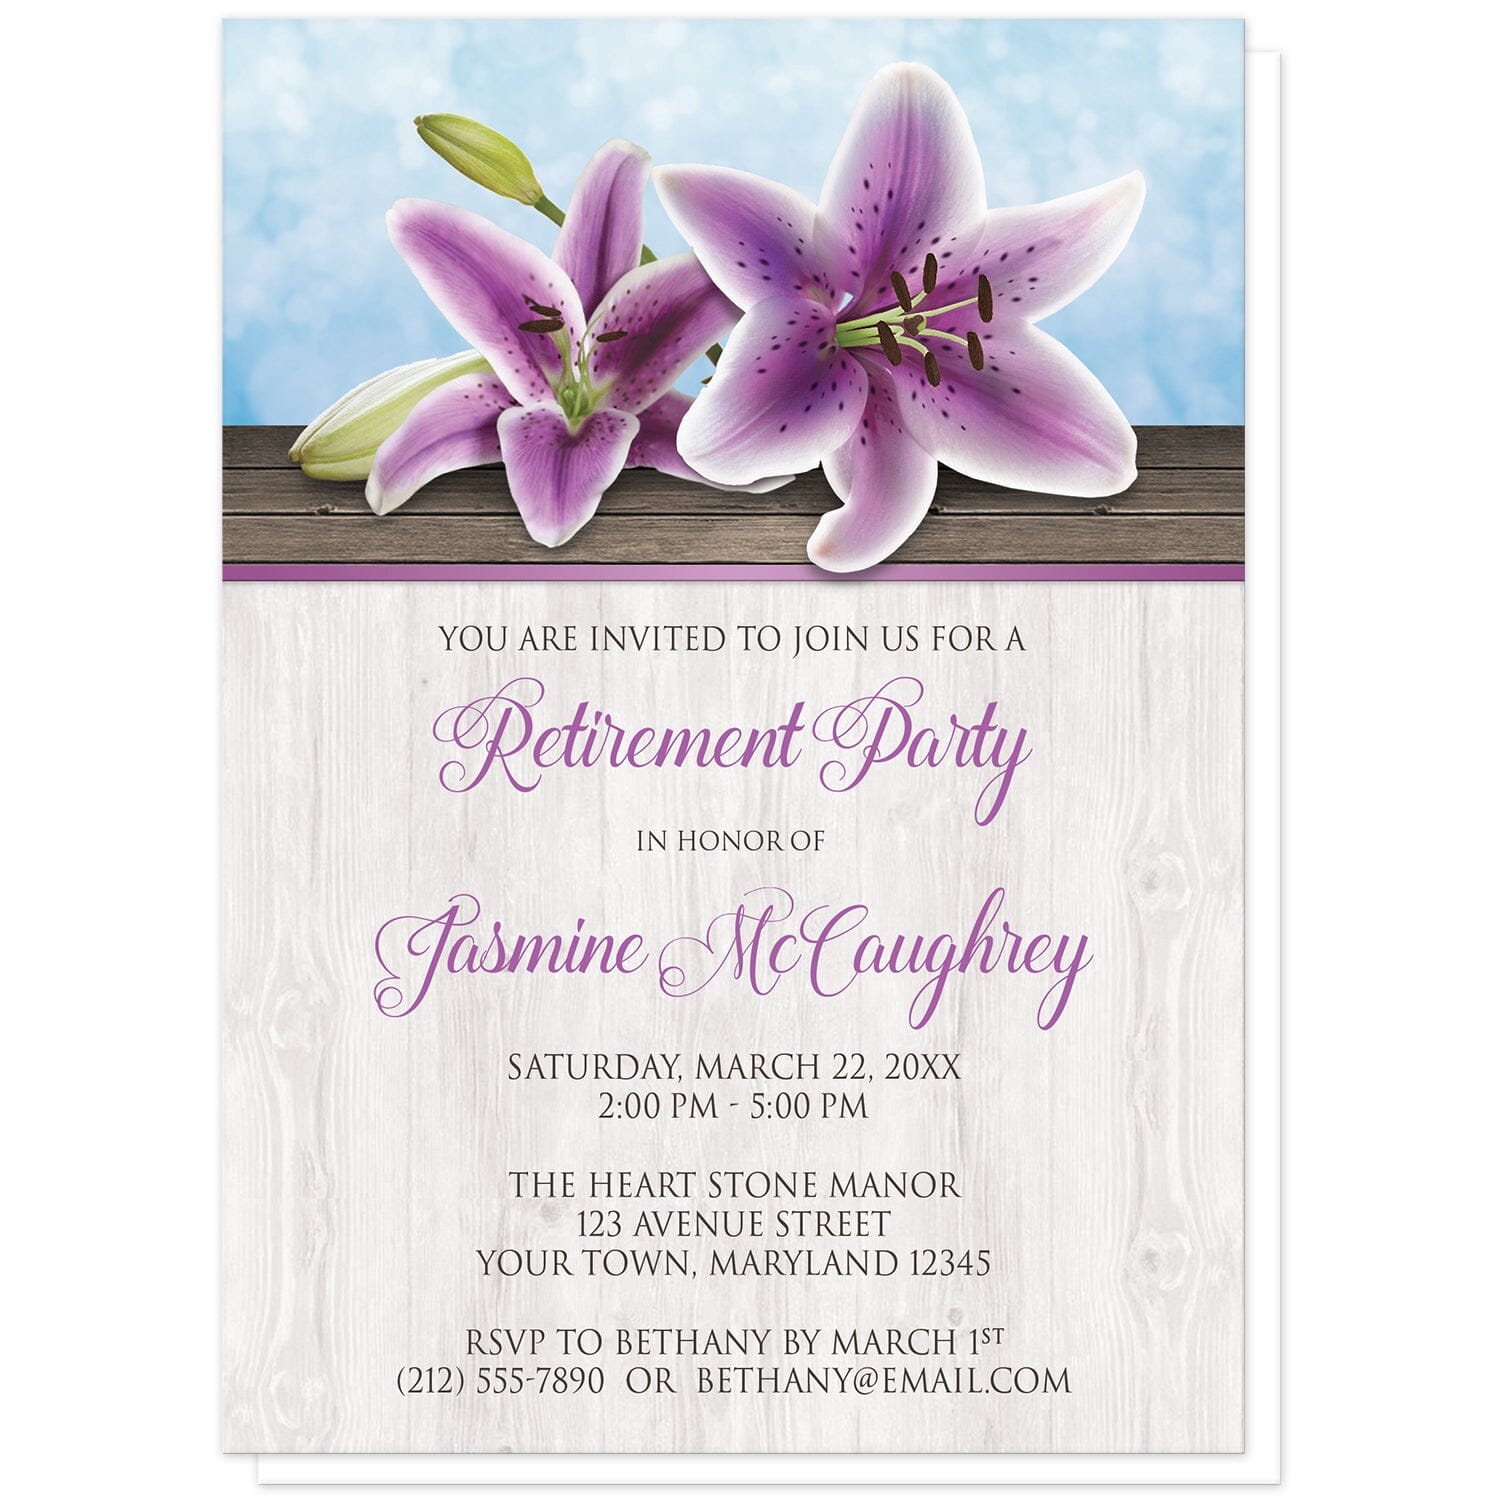 Pretty Floral Wood Purple Lily Retirement Invitations at Artistically Invited. Southern country-inspired pretty floral wood purple lily retirement invitations with two purple lilies on a light wood surface over a blue background design. Your personalized retirement party details are custom printed in purple and dark brown over the light wood pattern.